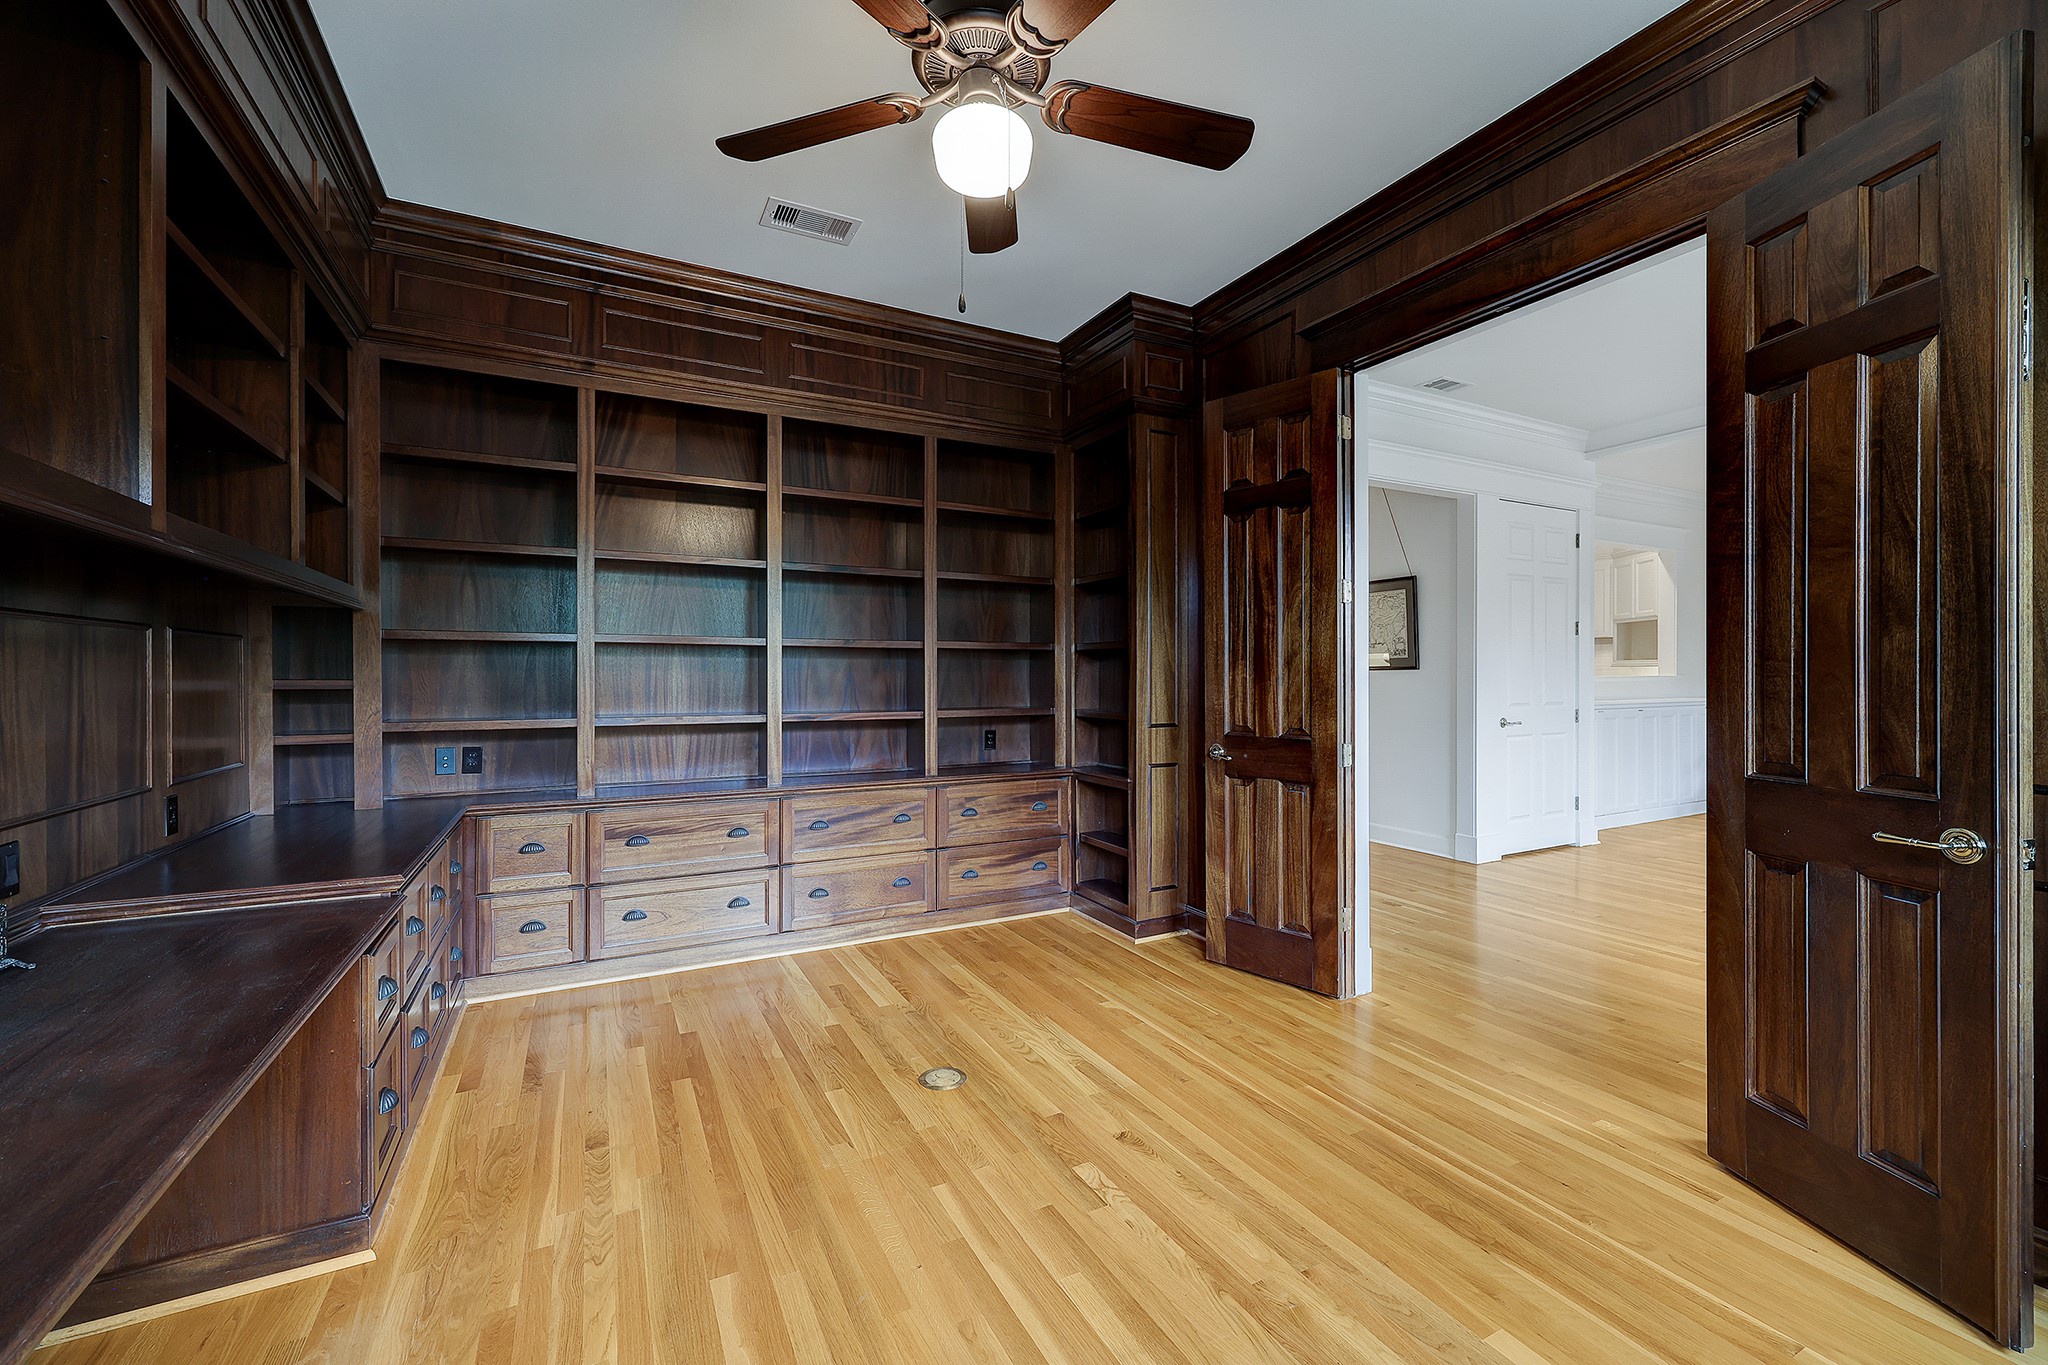 What would you use this large library / study / dining room for? A wine room perhaps? (virtually staged)